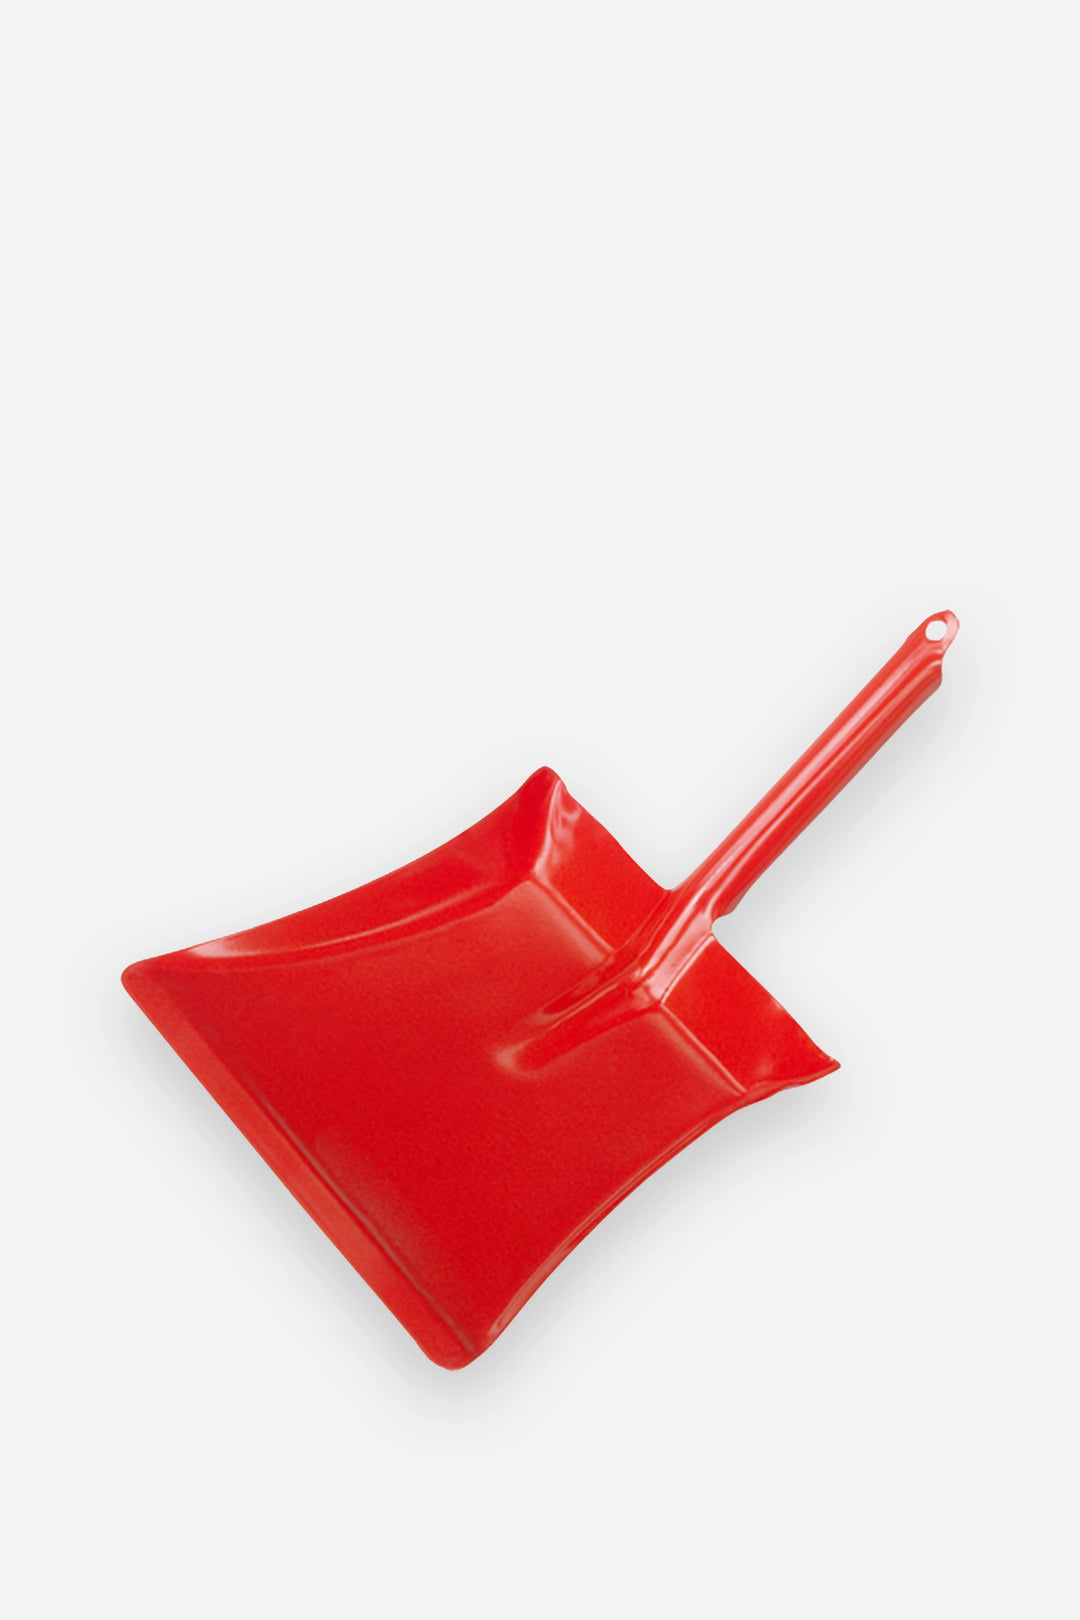 Childs Dust Pan / Red